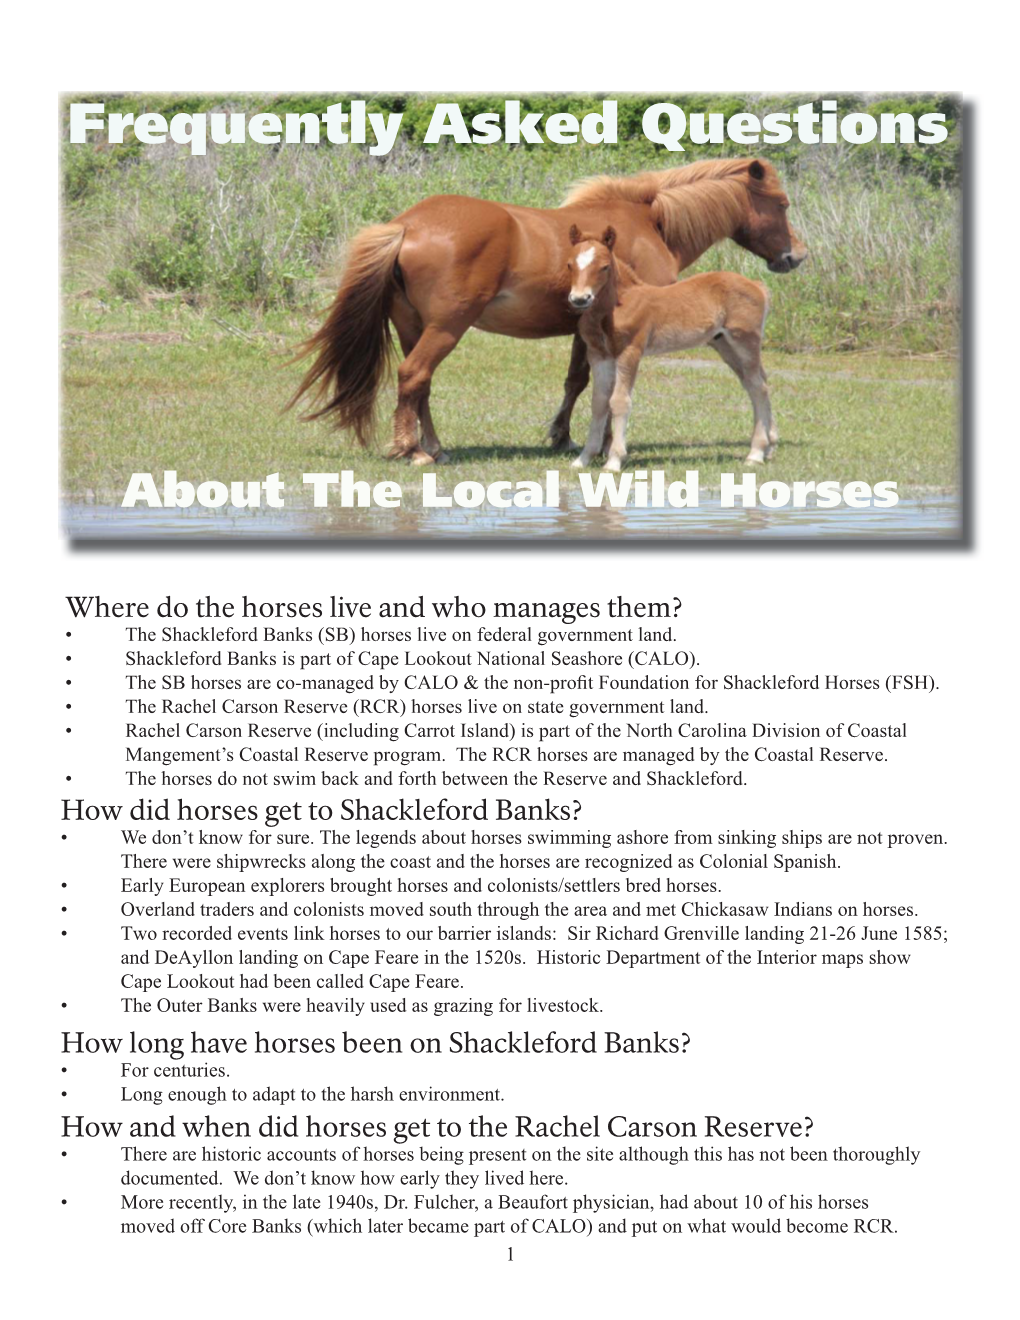 Frequently Asked Questions About Our Local Wild Horses